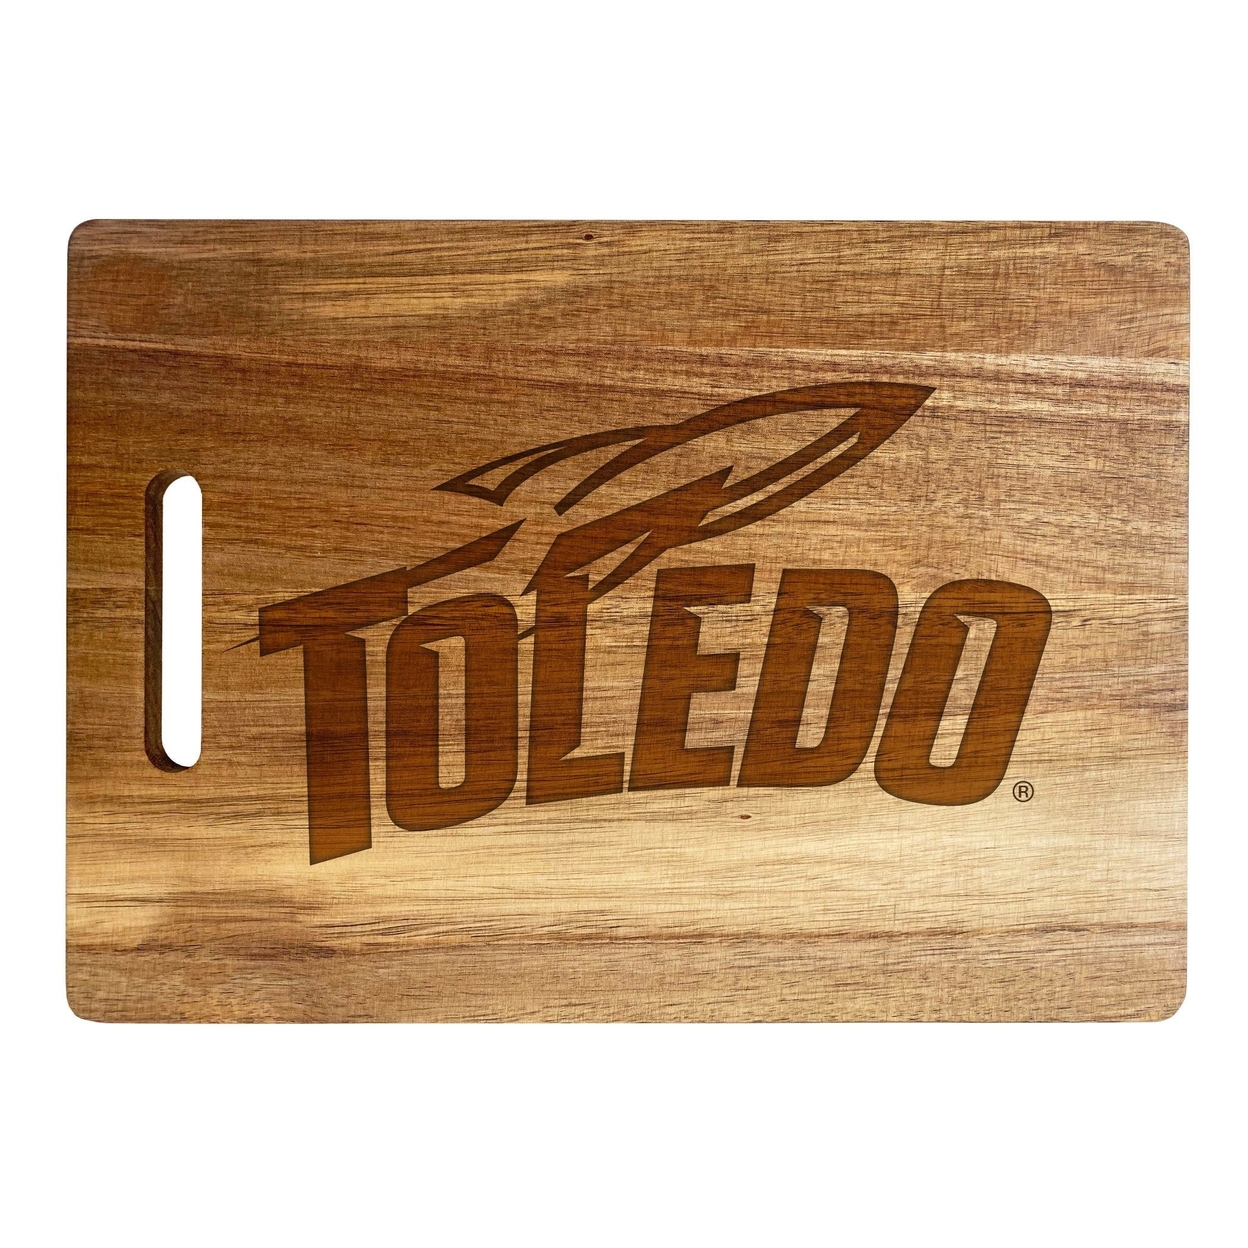 Toledo Rockets Engraved Wooden Cutting Board 10 X 14 Acacia Wood - Large Engraving